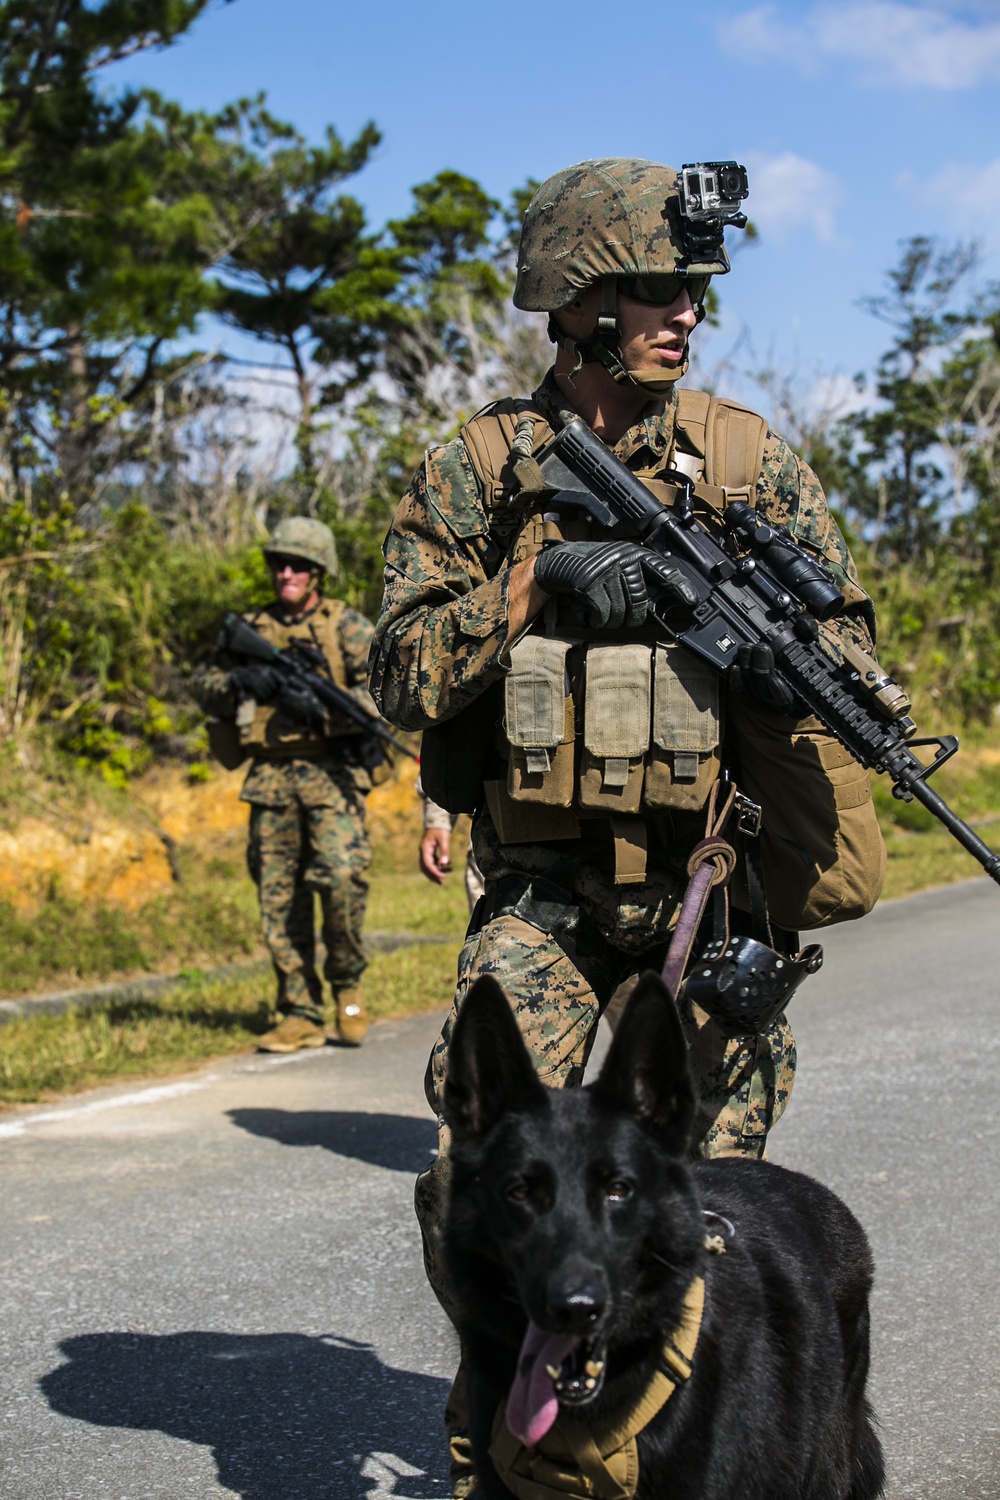 Military Working Dogs play vital role locating Marines